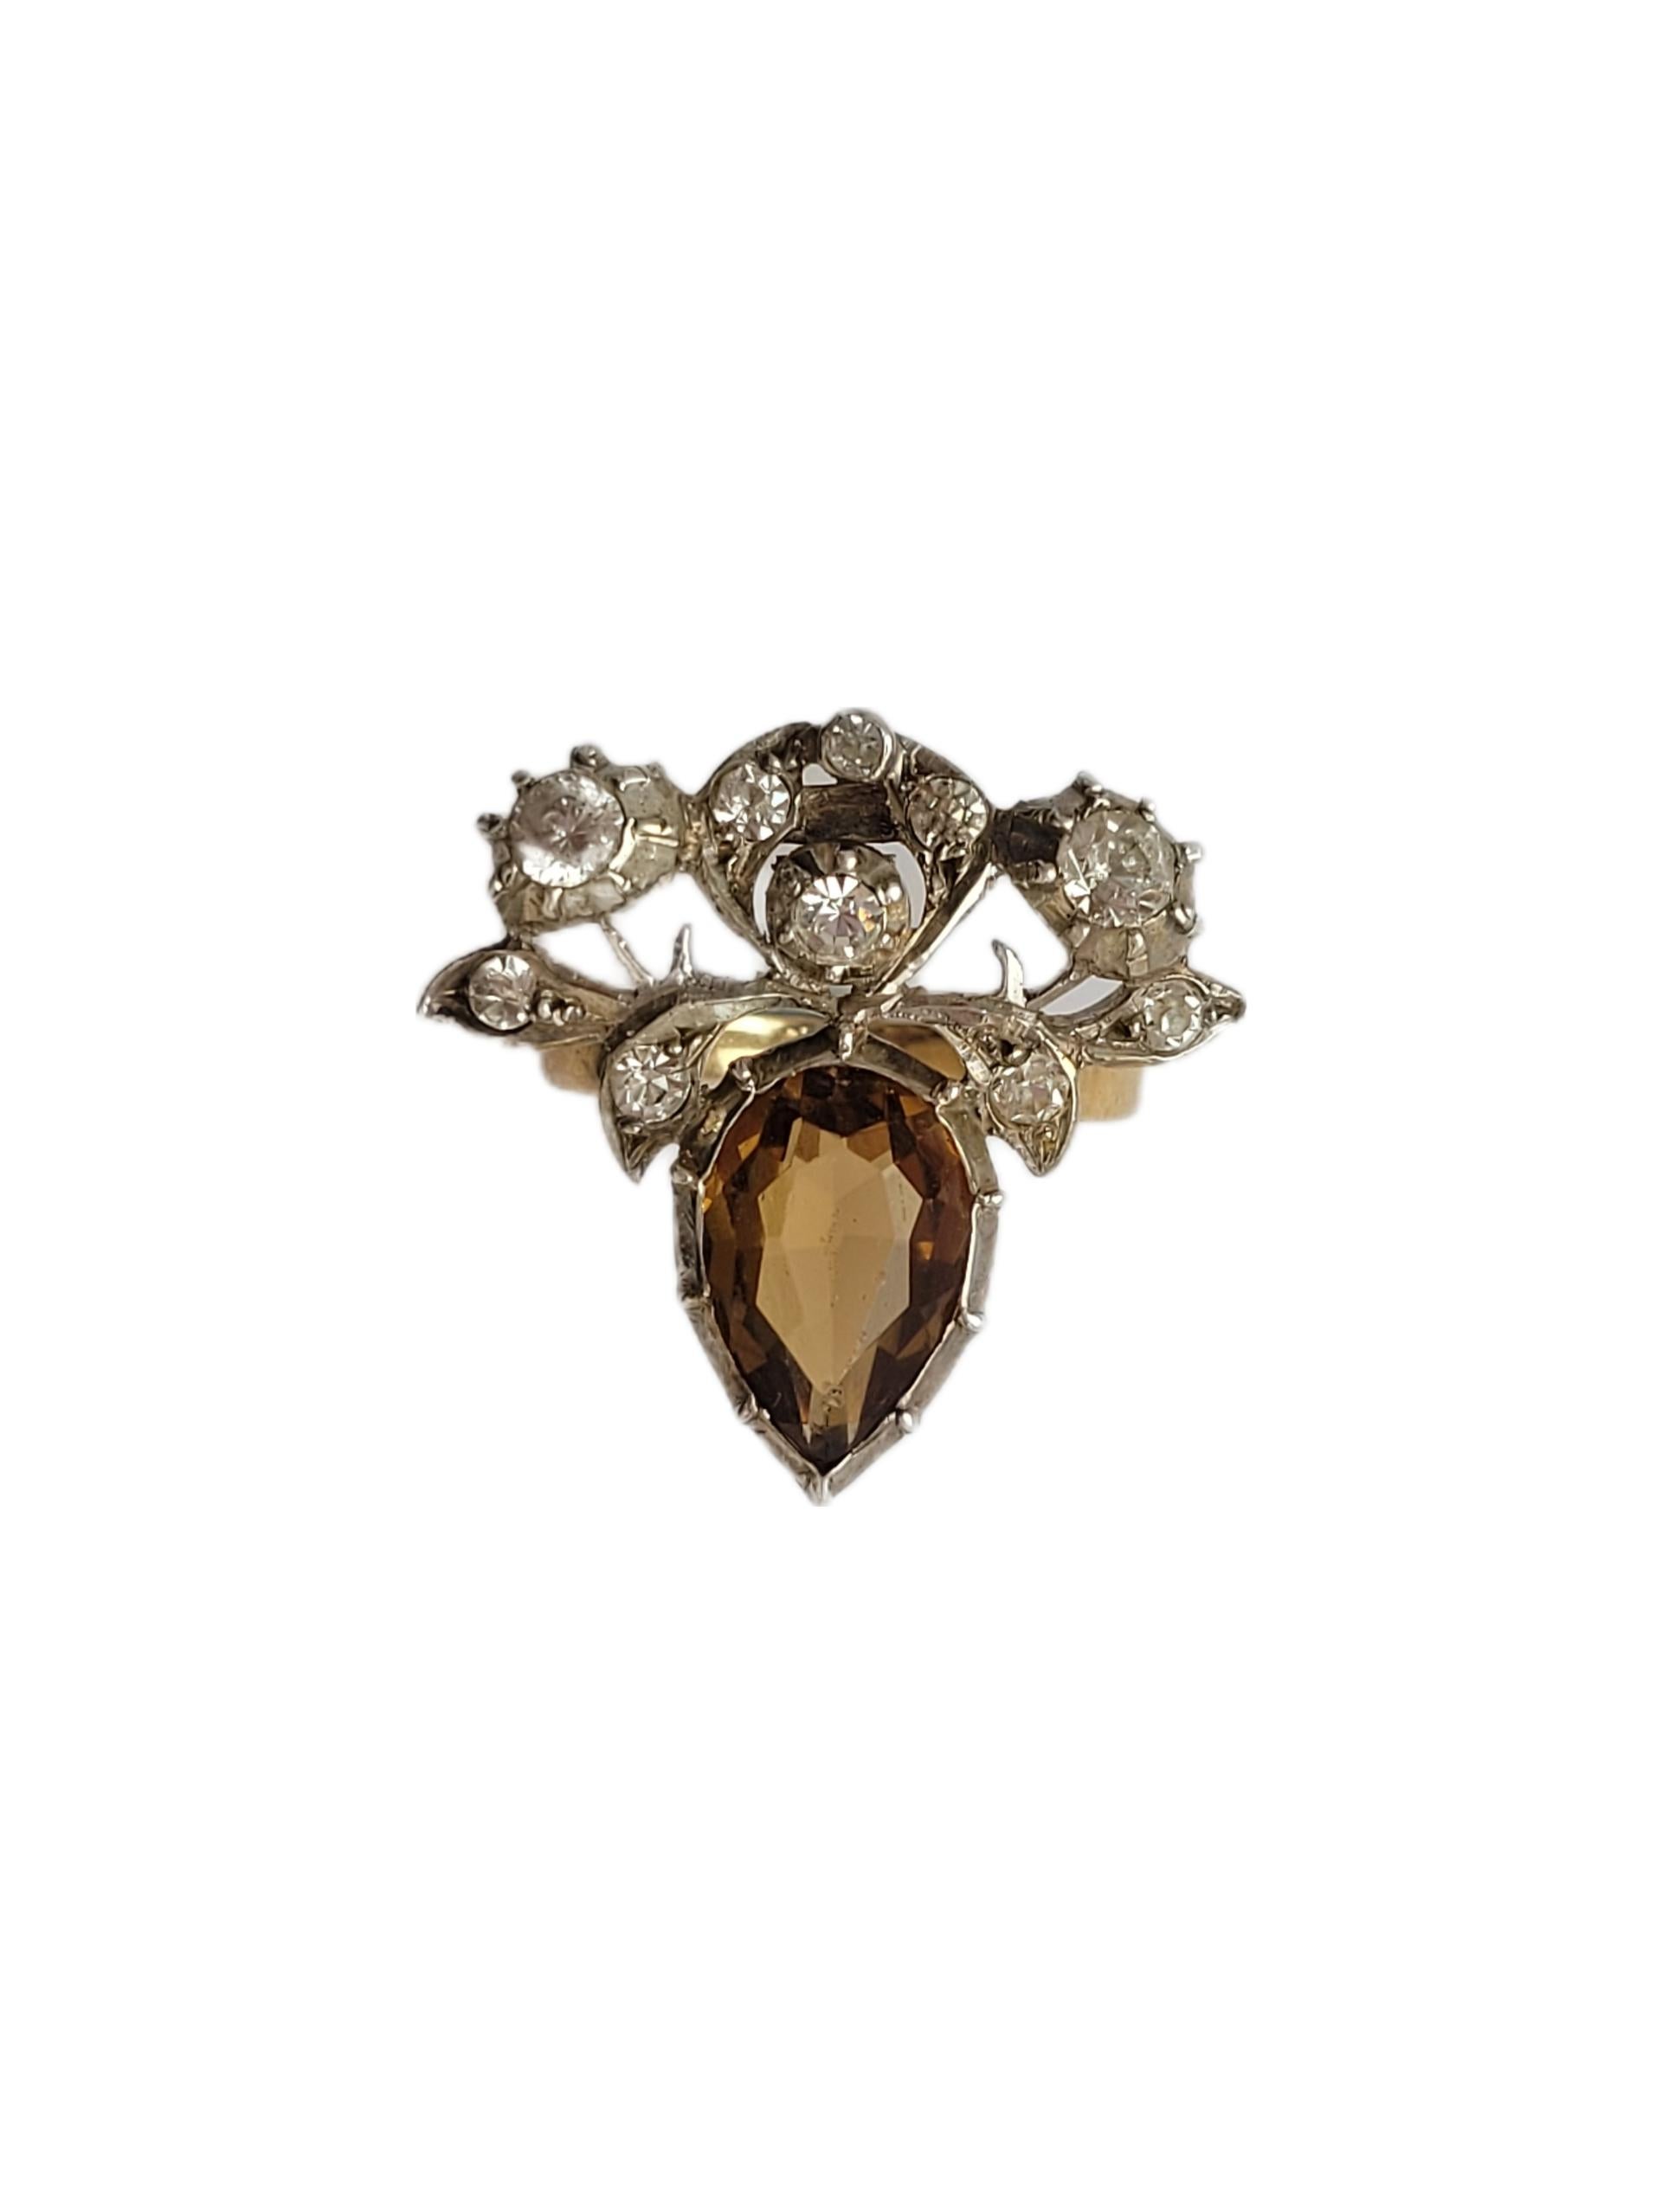 A Breathtaking 9 Carat Gold, Silver and Paste heart ring. This is an Art Deco dress clip conversion. The ring made in Georgian style. One of a kind. English origin.
Size Q 3/4 UK, 8.75 US can be sized.
Face of the ring 26mm x 28mm.
Weight